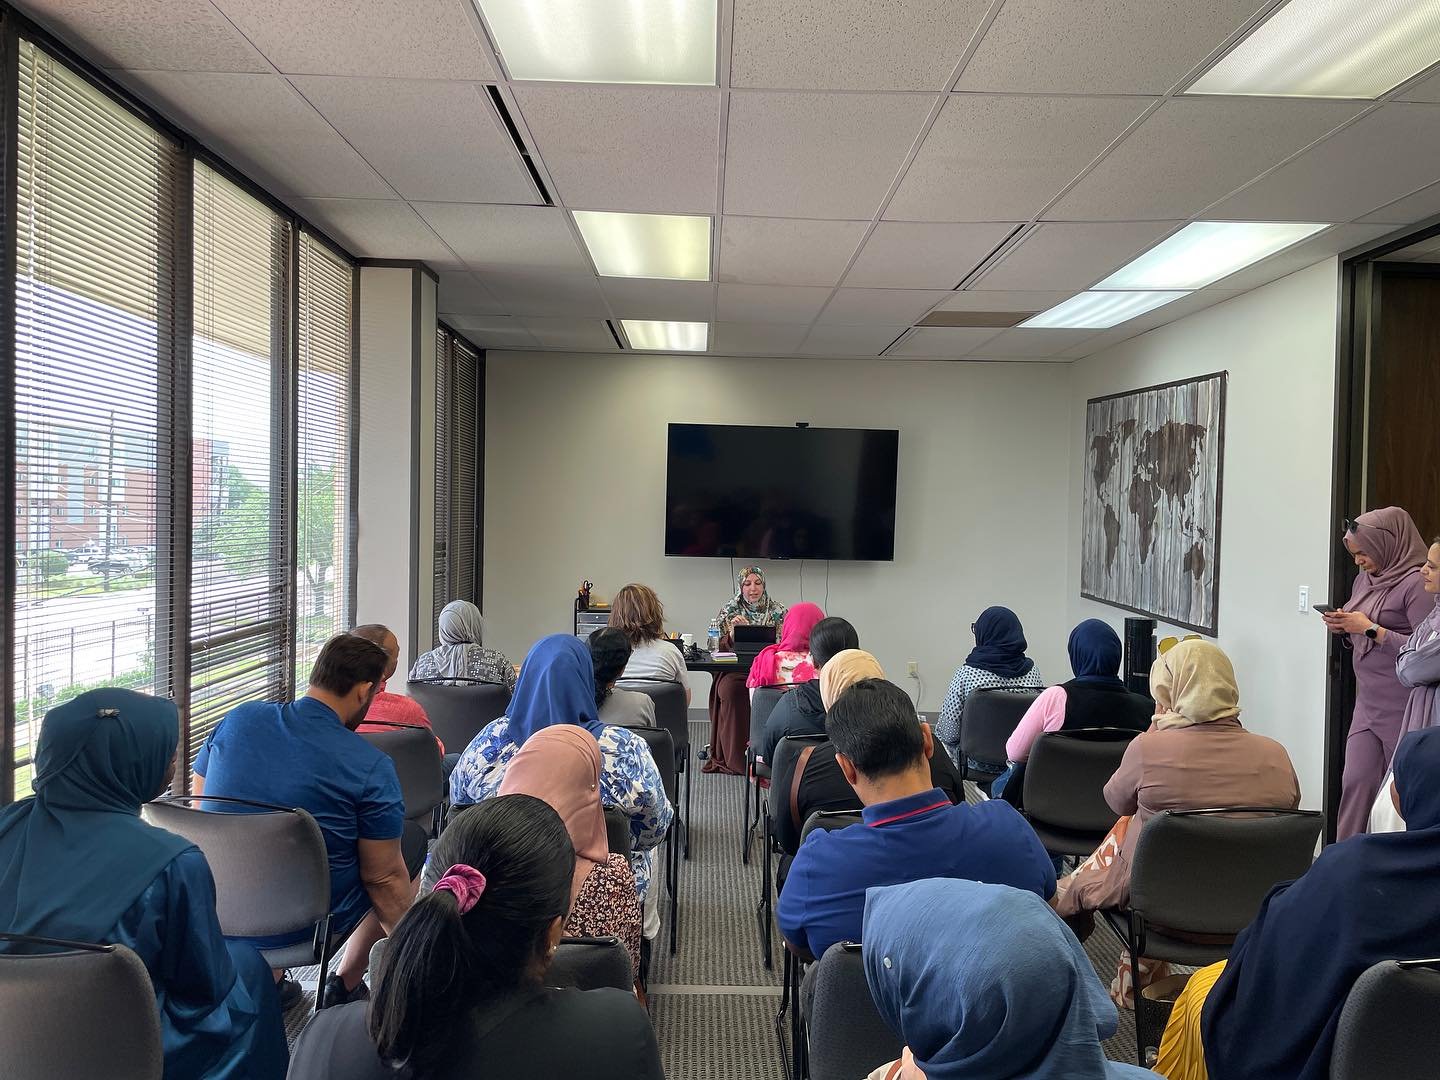 Parenting Workshop with Sarah Sultan, LPC, LMHC recap👨&zwj;👩&zwj;👧&zwj;👦!

This past weekend Sarah Sultan led an informative session on how to build a Muslim identity within our children and resiliency. This workshop included open discussions and